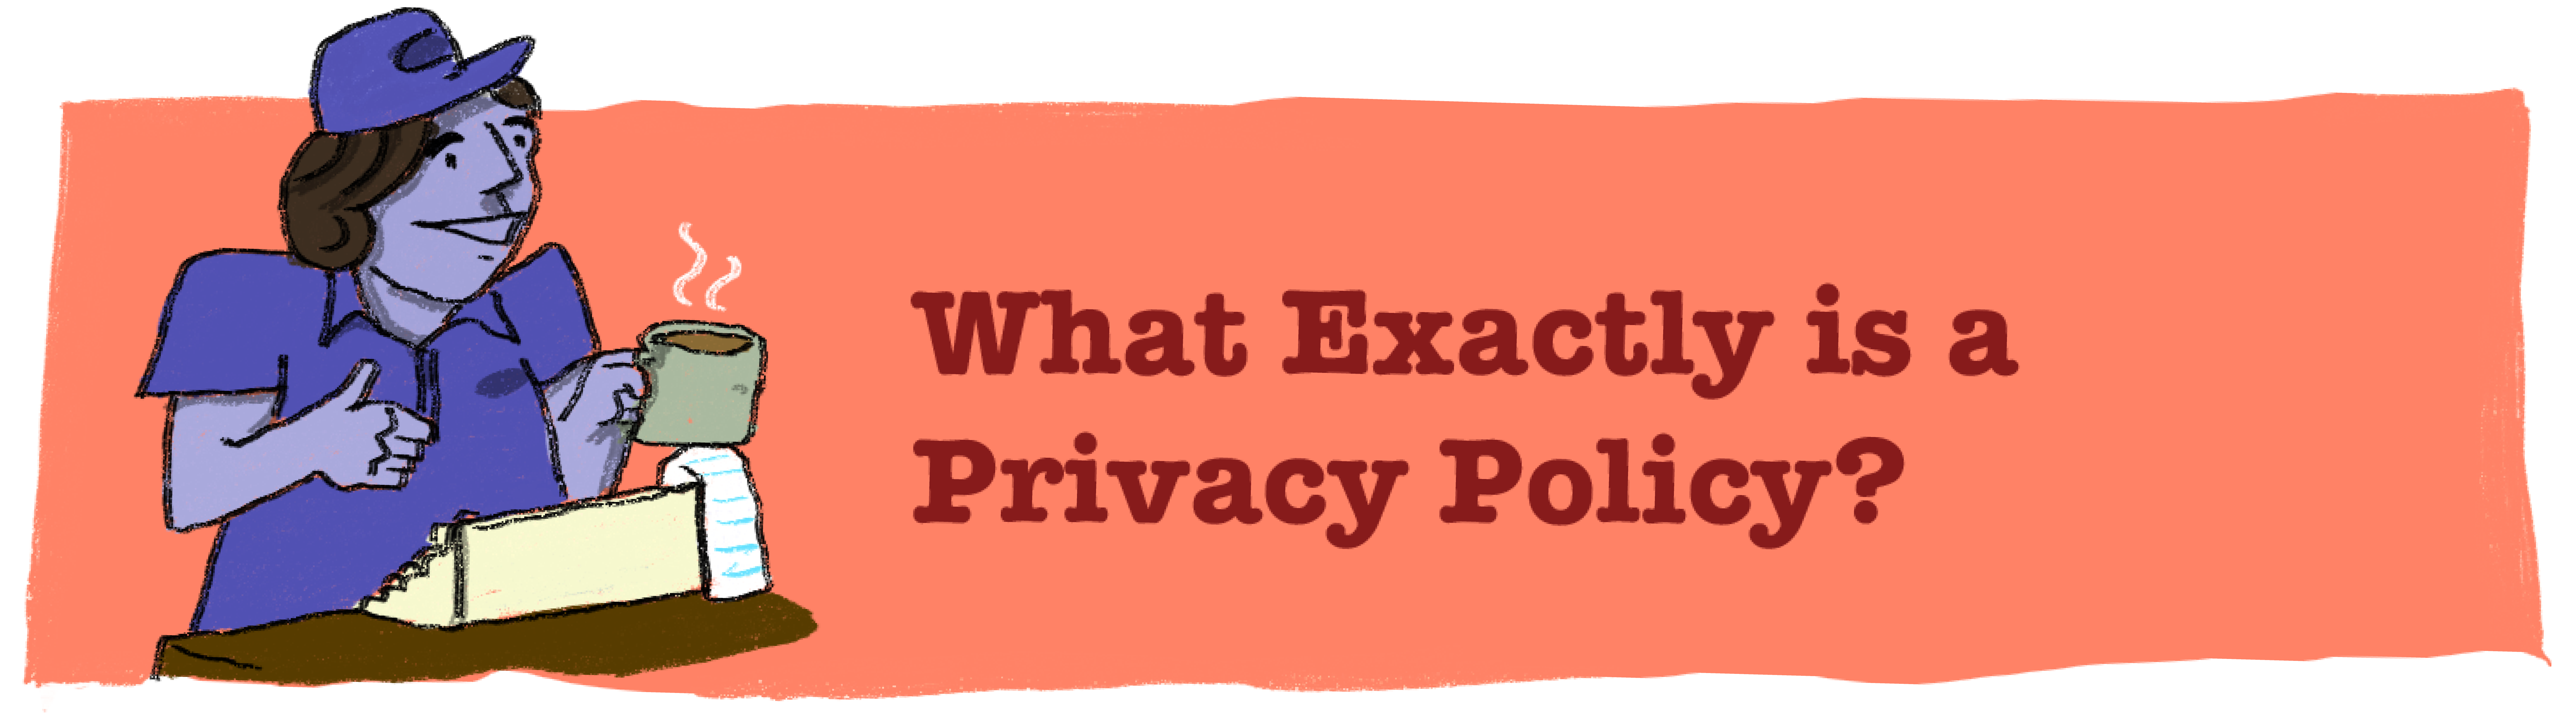 What Exactly is a Privacy Policy?